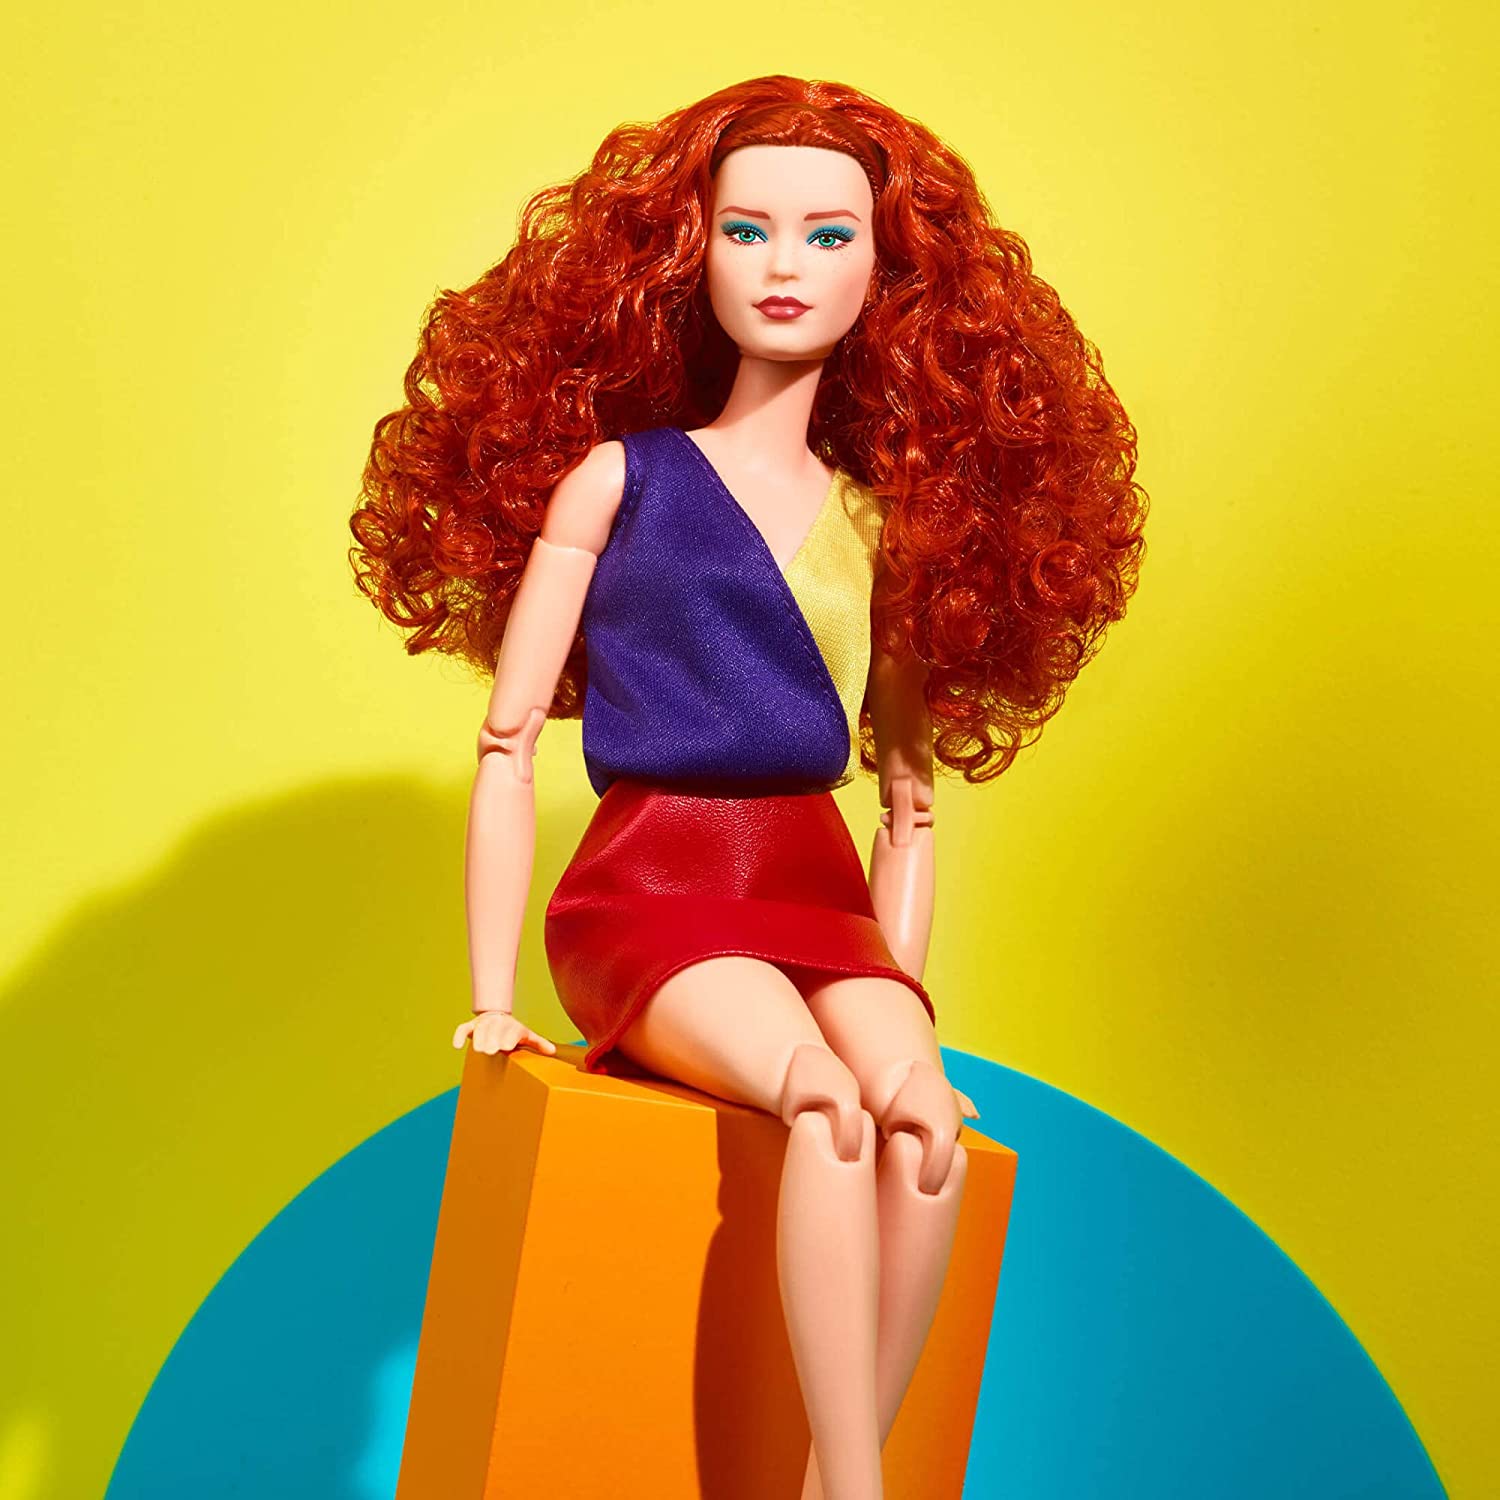 Barbie Signature Barbie Looks Doll (Brunette Wavy Hair, Curvy Body Type),  Fully Posable Fashion Doll, For Collectors